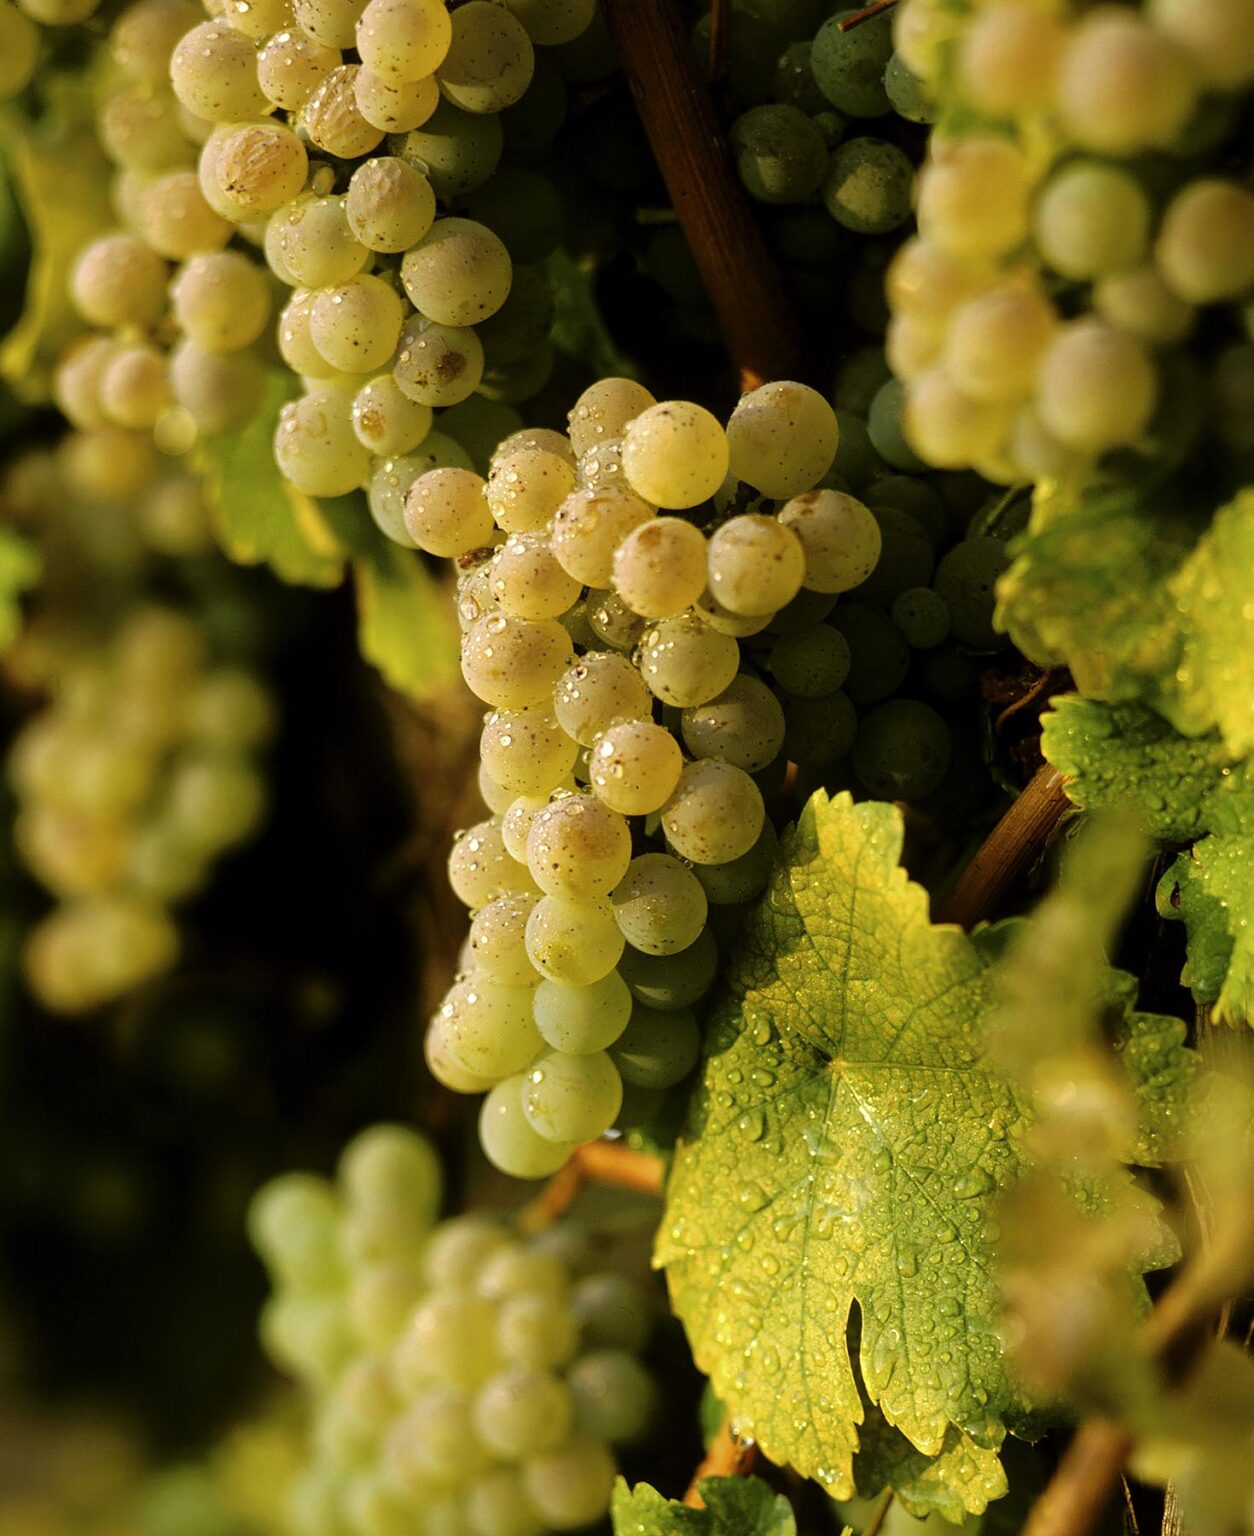 Clusters of SAUVIGNON BLANC glisten in the morning dew at harvest time in CALIFORNIA